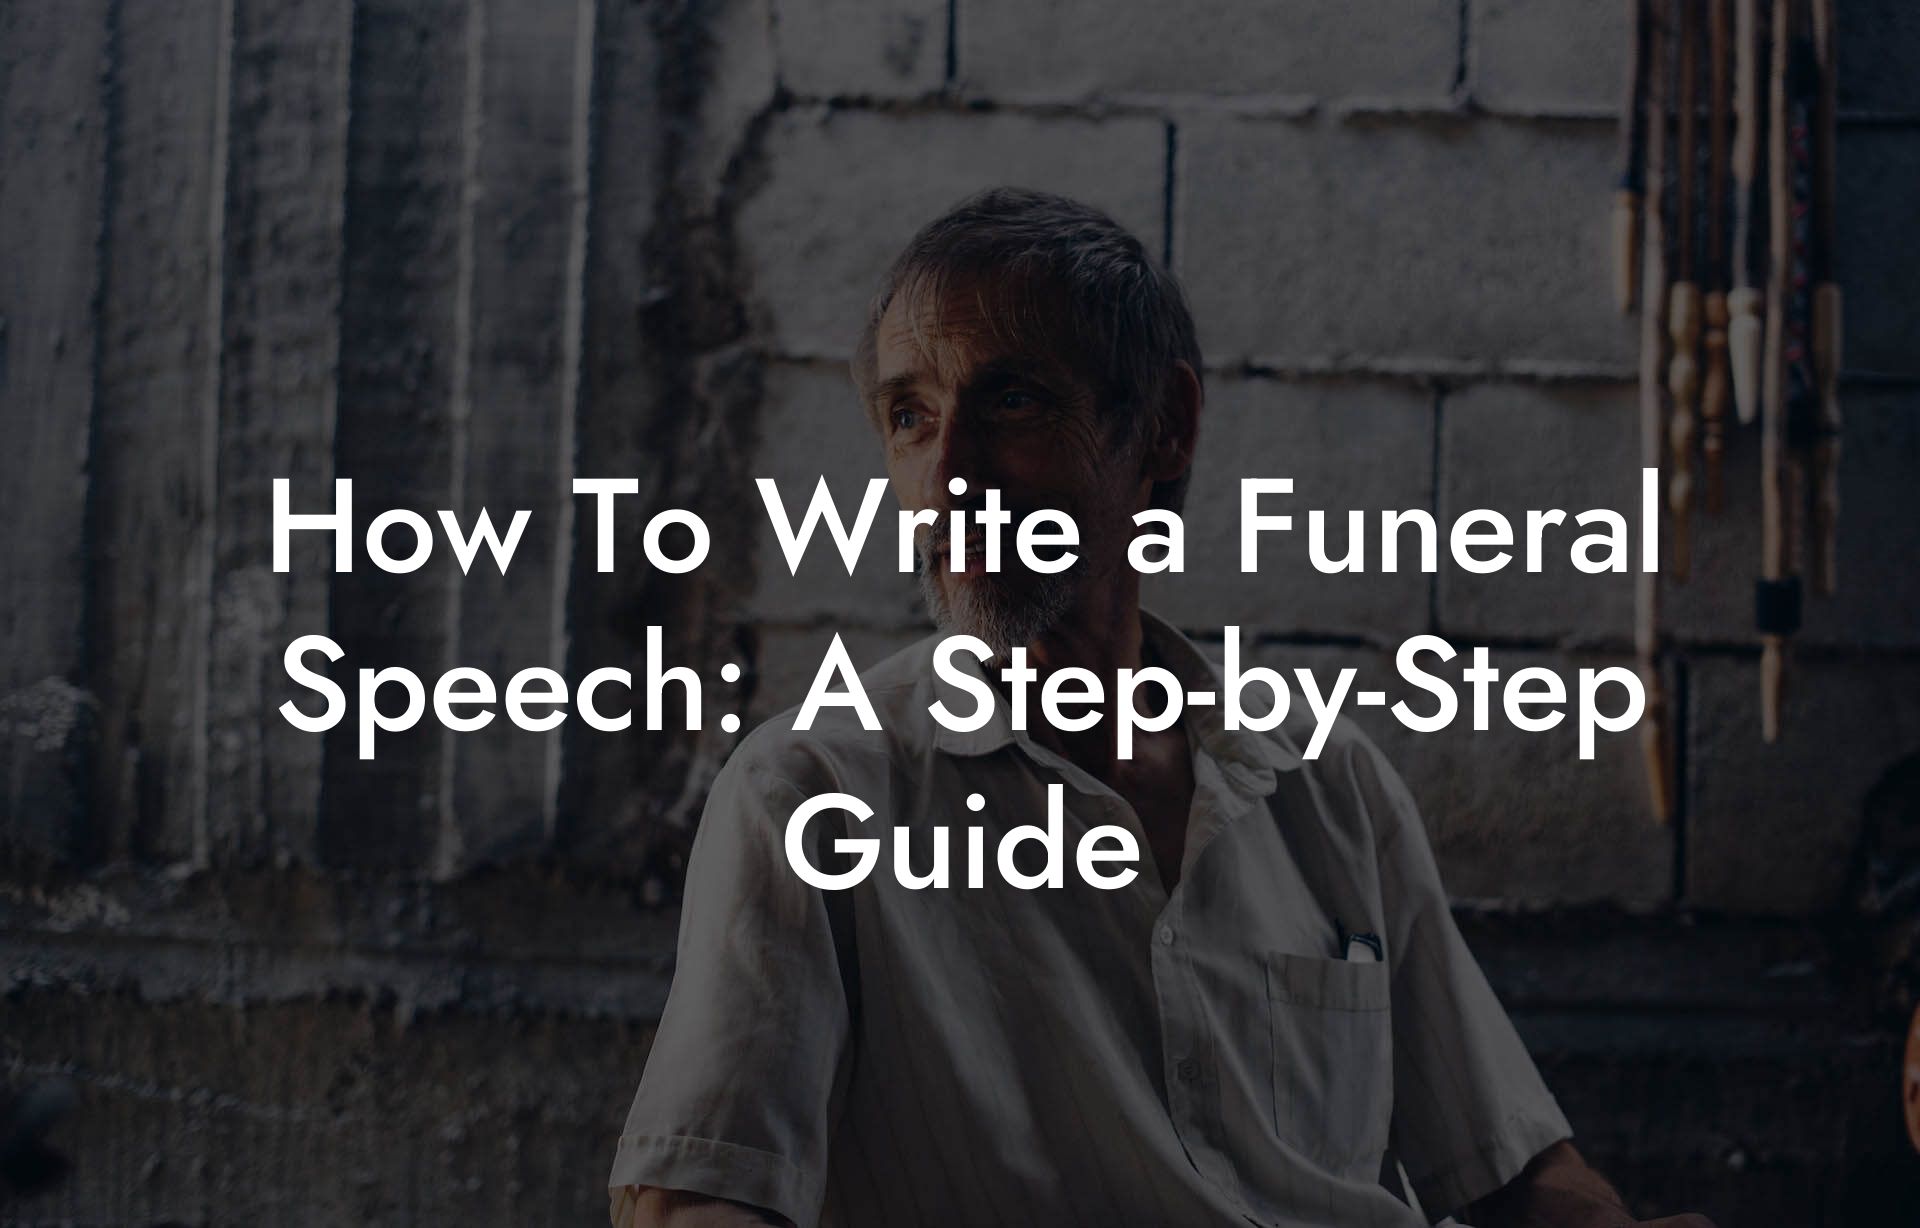 How To Write a Funeral Speech: A Step-by-Step Guide